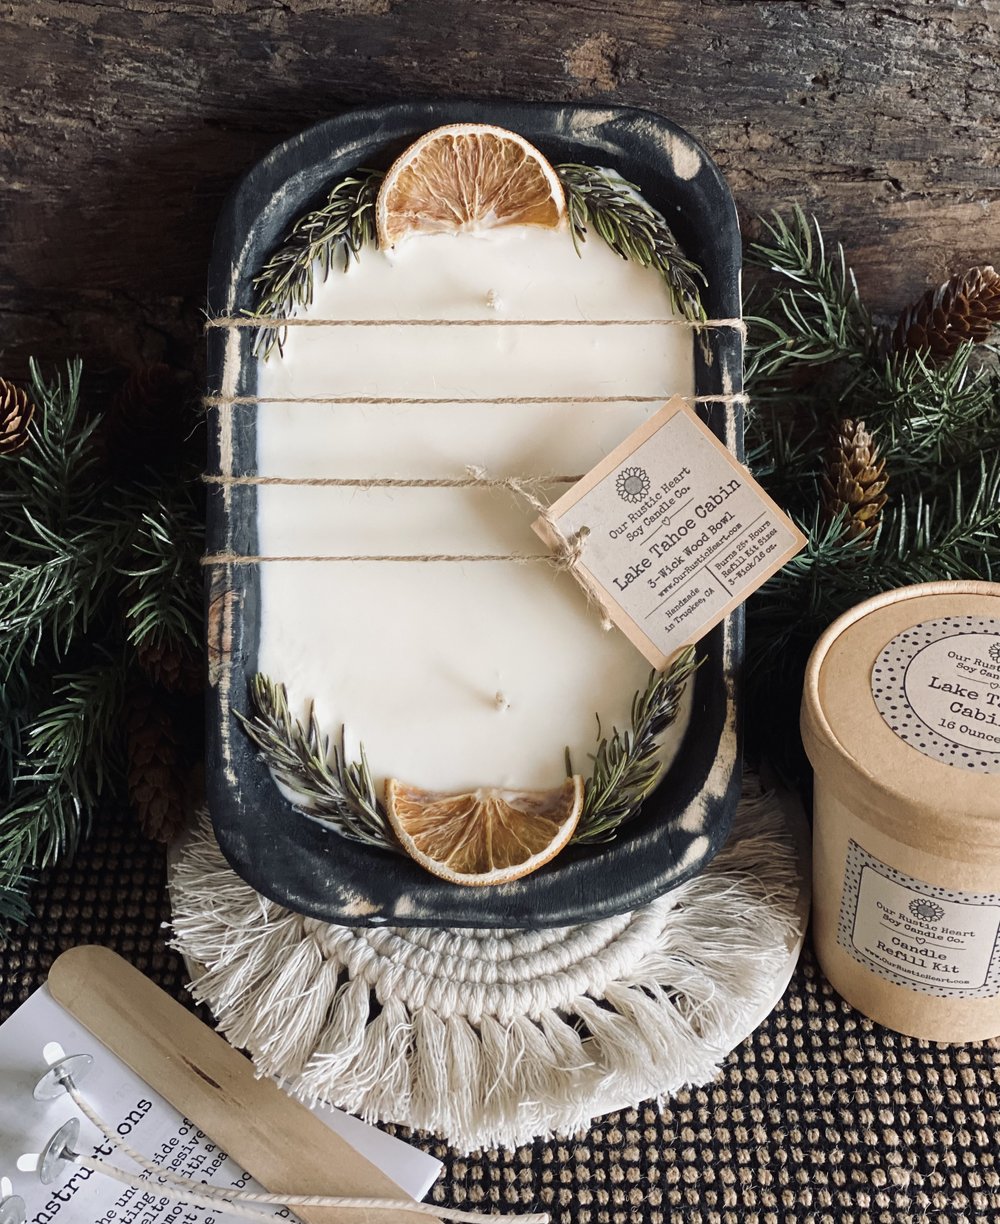 Rustic White Wood Bowl Candle & DIY Candle Refill Kit Bundle — Our Rustic  Heart Candle Co.